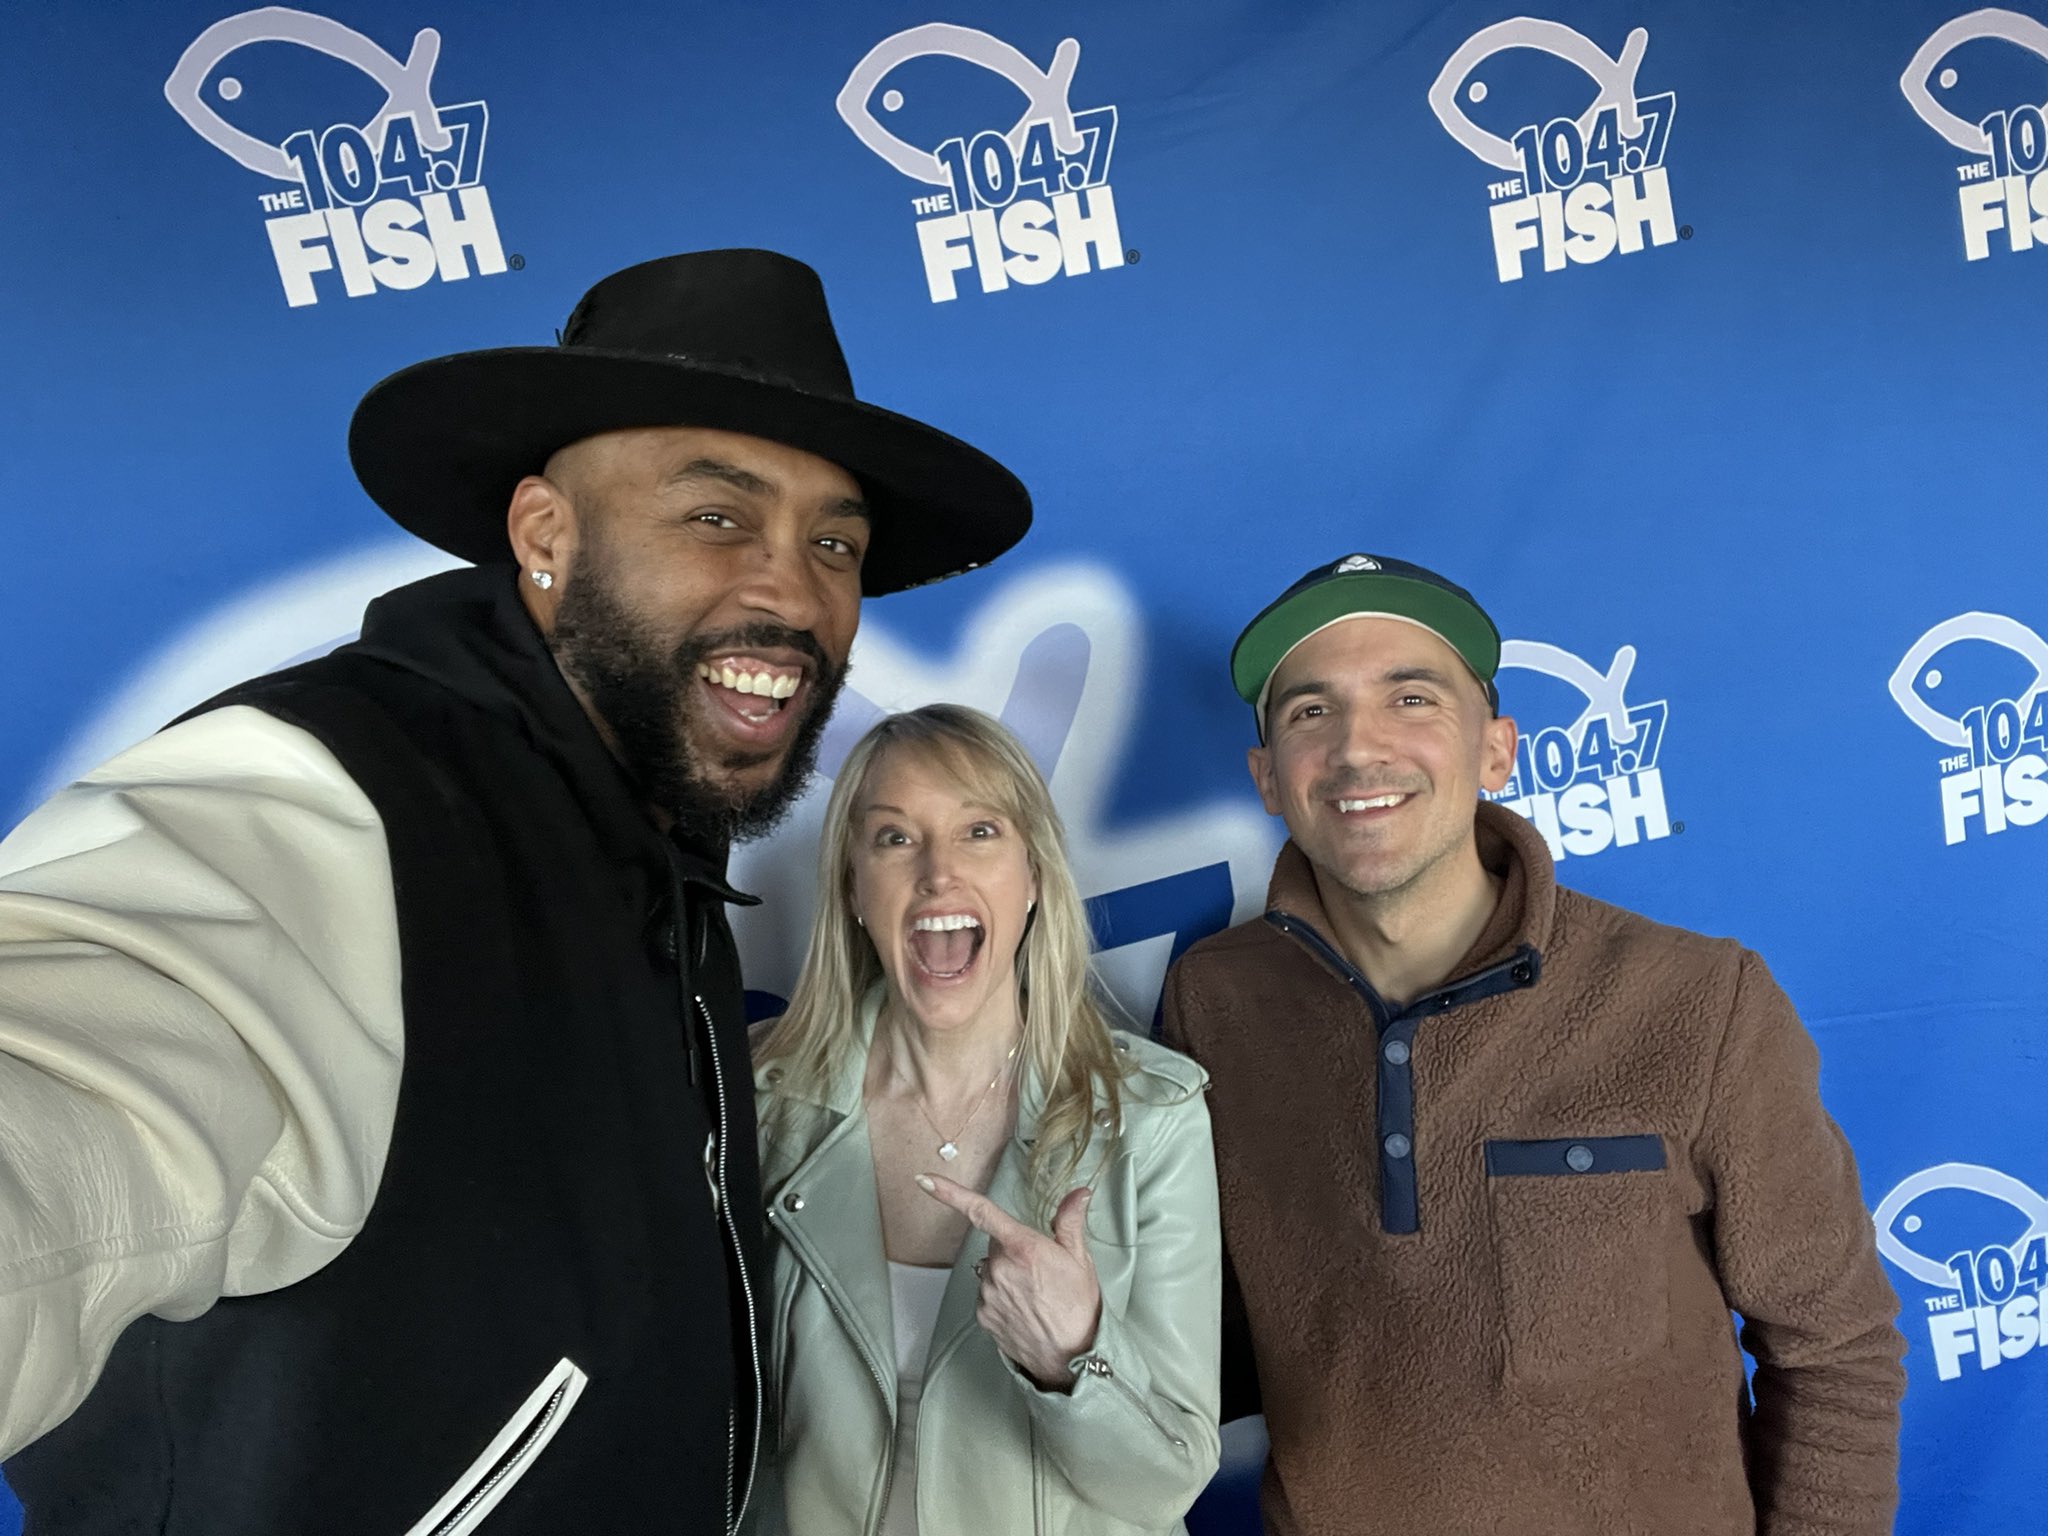 Kevin and Taylor on X: Thanks @montelljordan for hanging out with us on  the show while @Fit_Kev is off. Check out “This is How We Date Night”   @taylorscottbike @RadioGriff   /